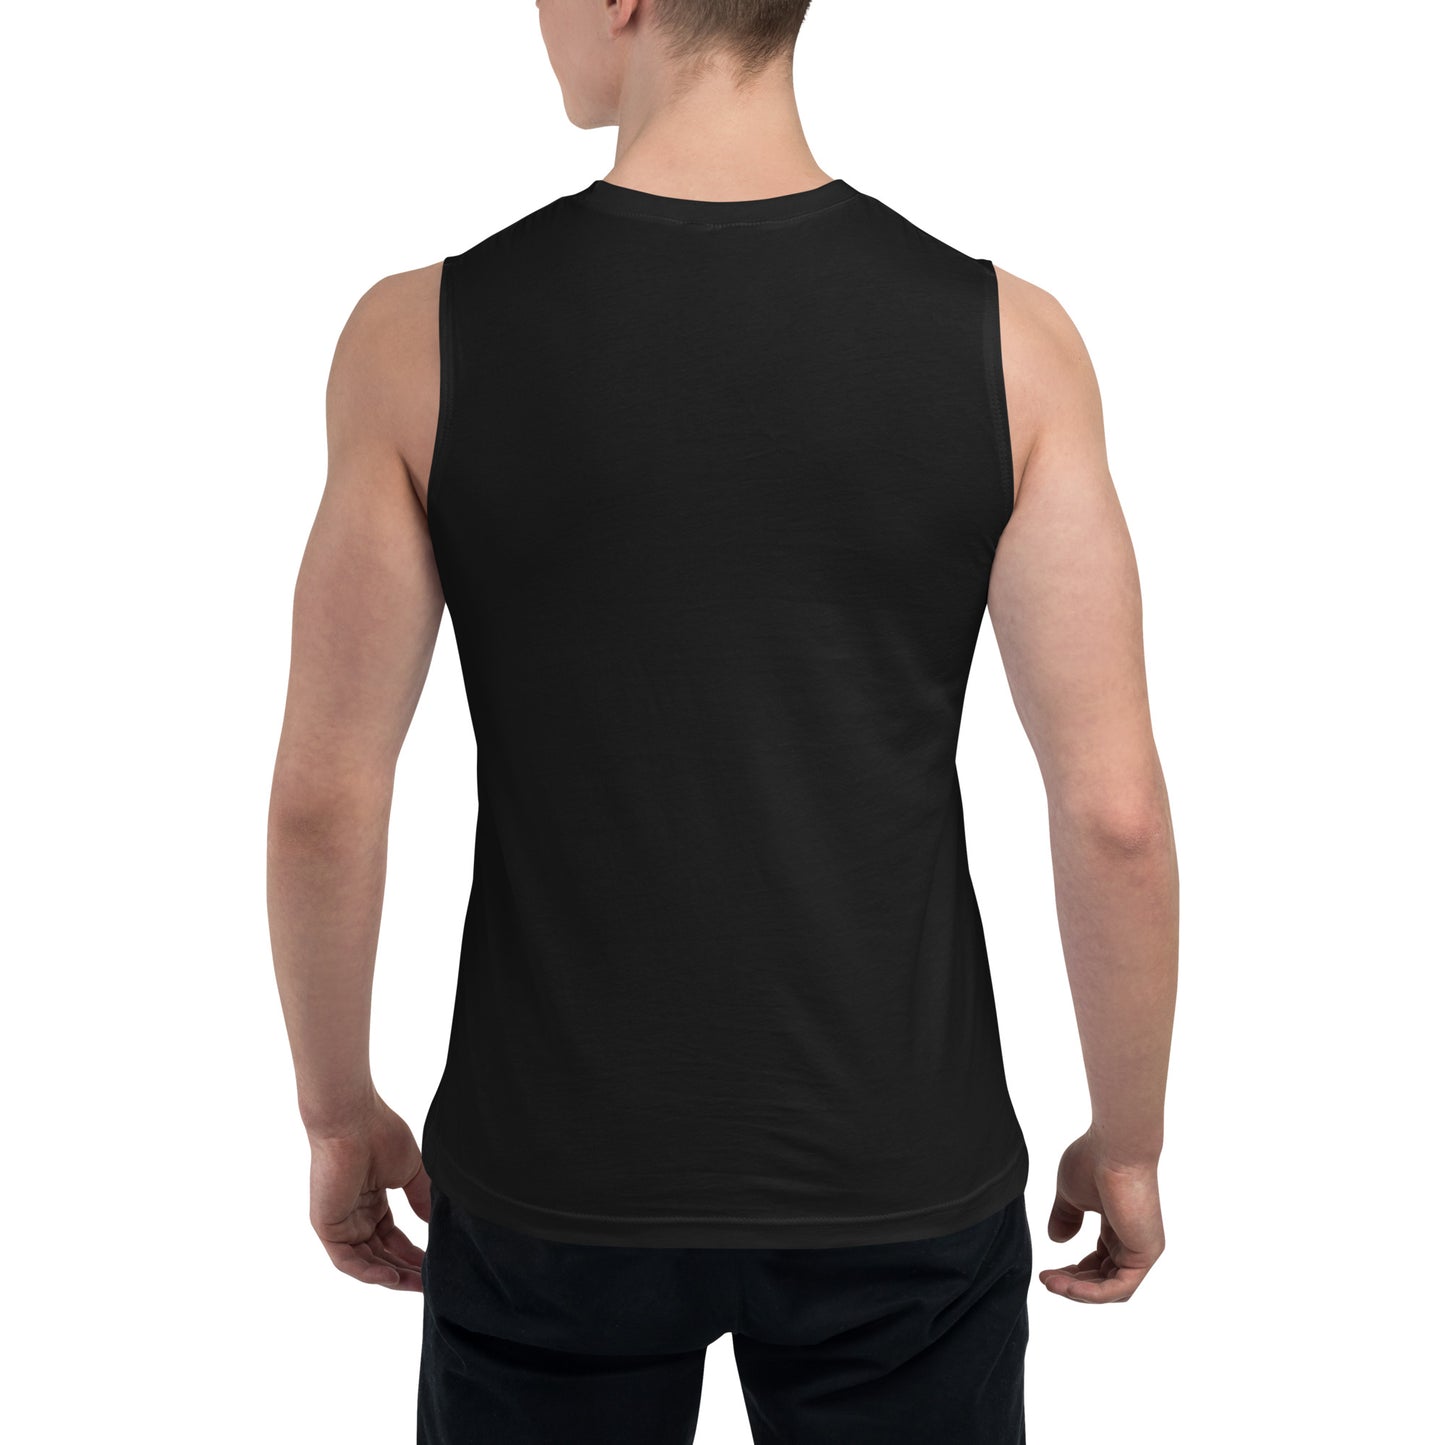 CONNECTED Muscle Shirt